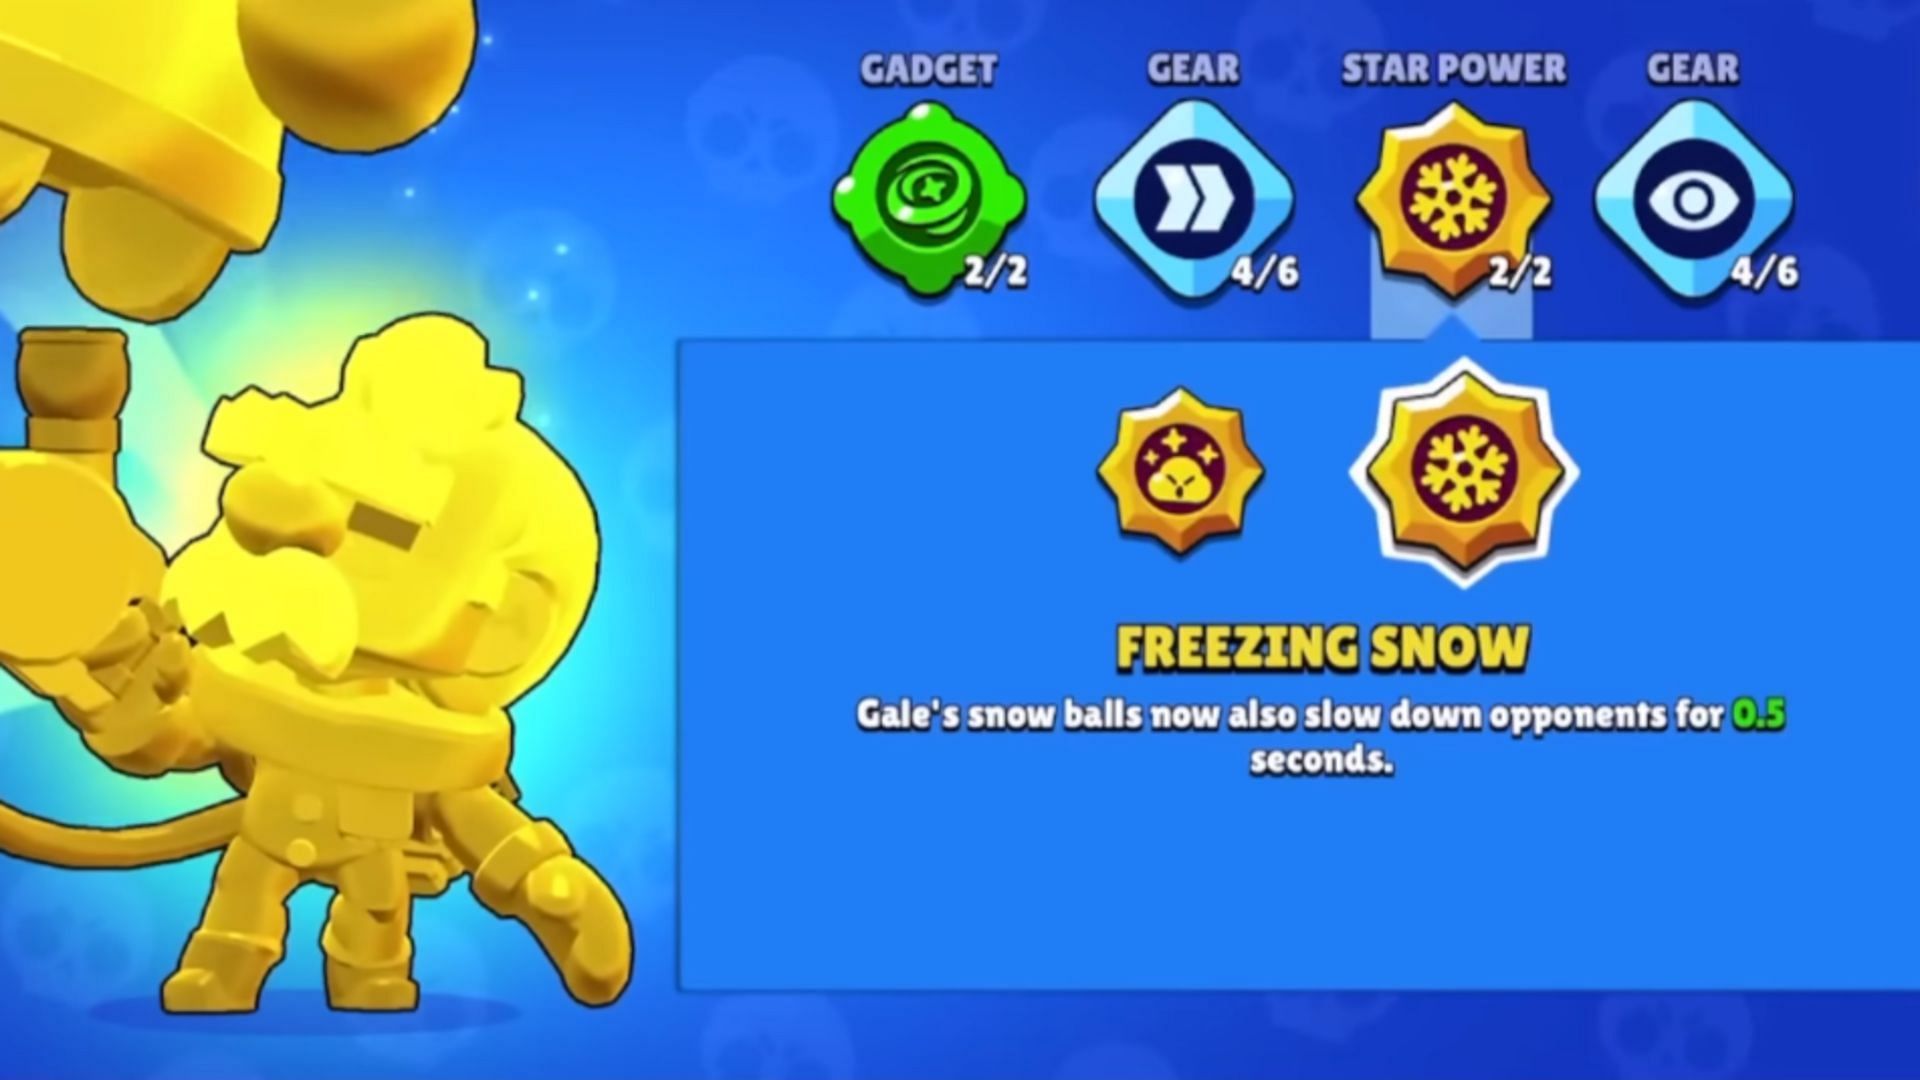 Freezing Snow Star Power (Image via Supercell)